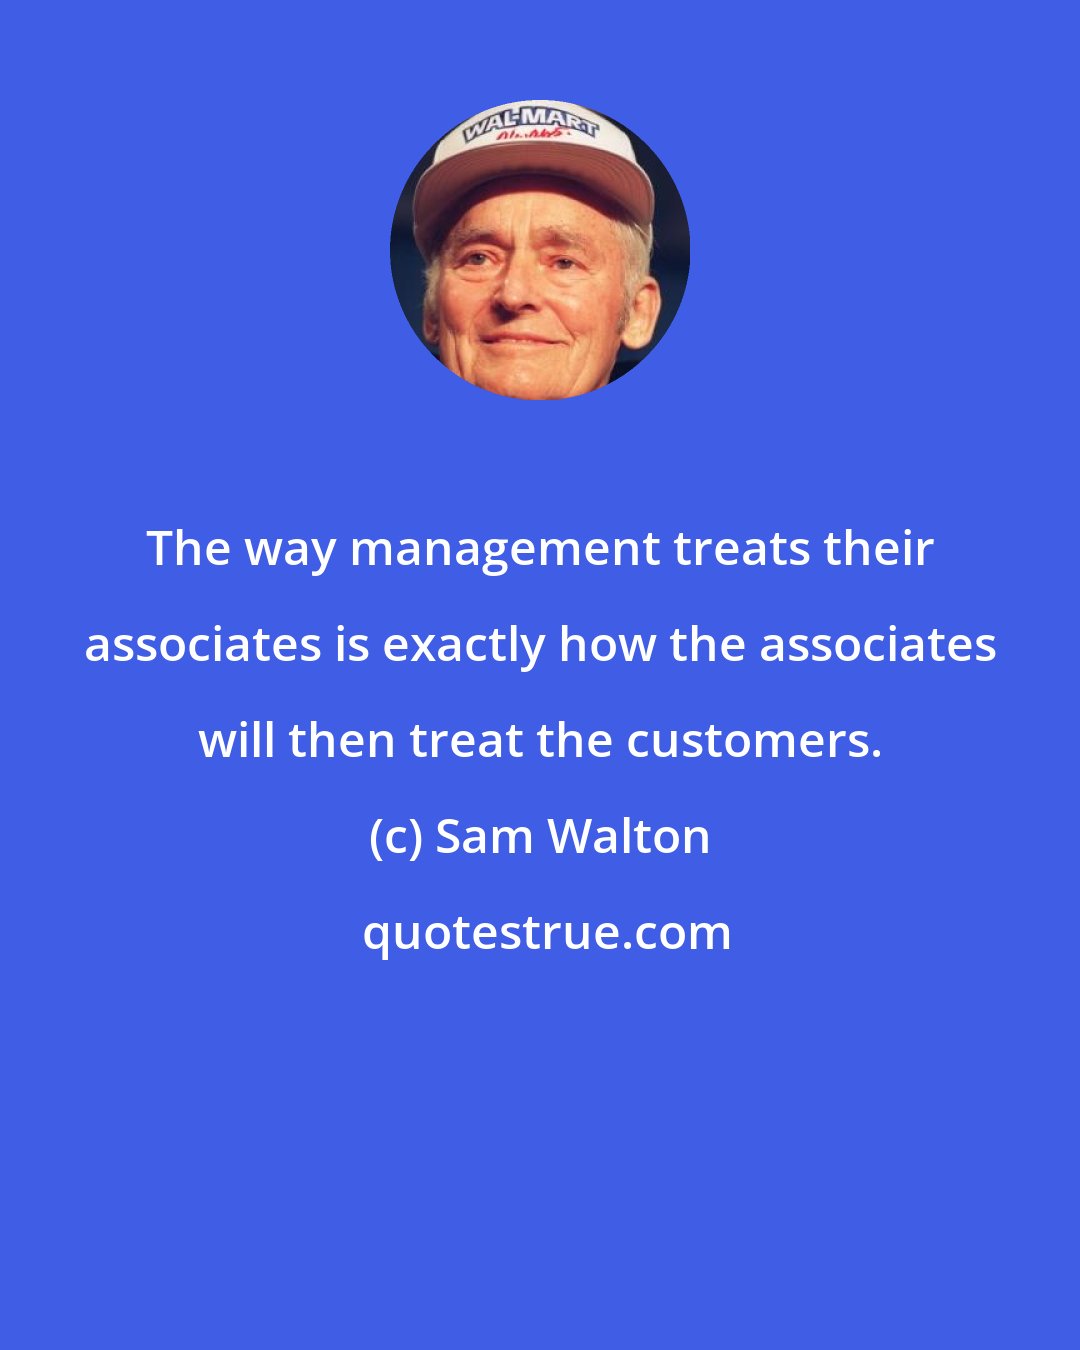 Sam Walton: The way management treats their associates is exactly how the associates will then treat the customers.